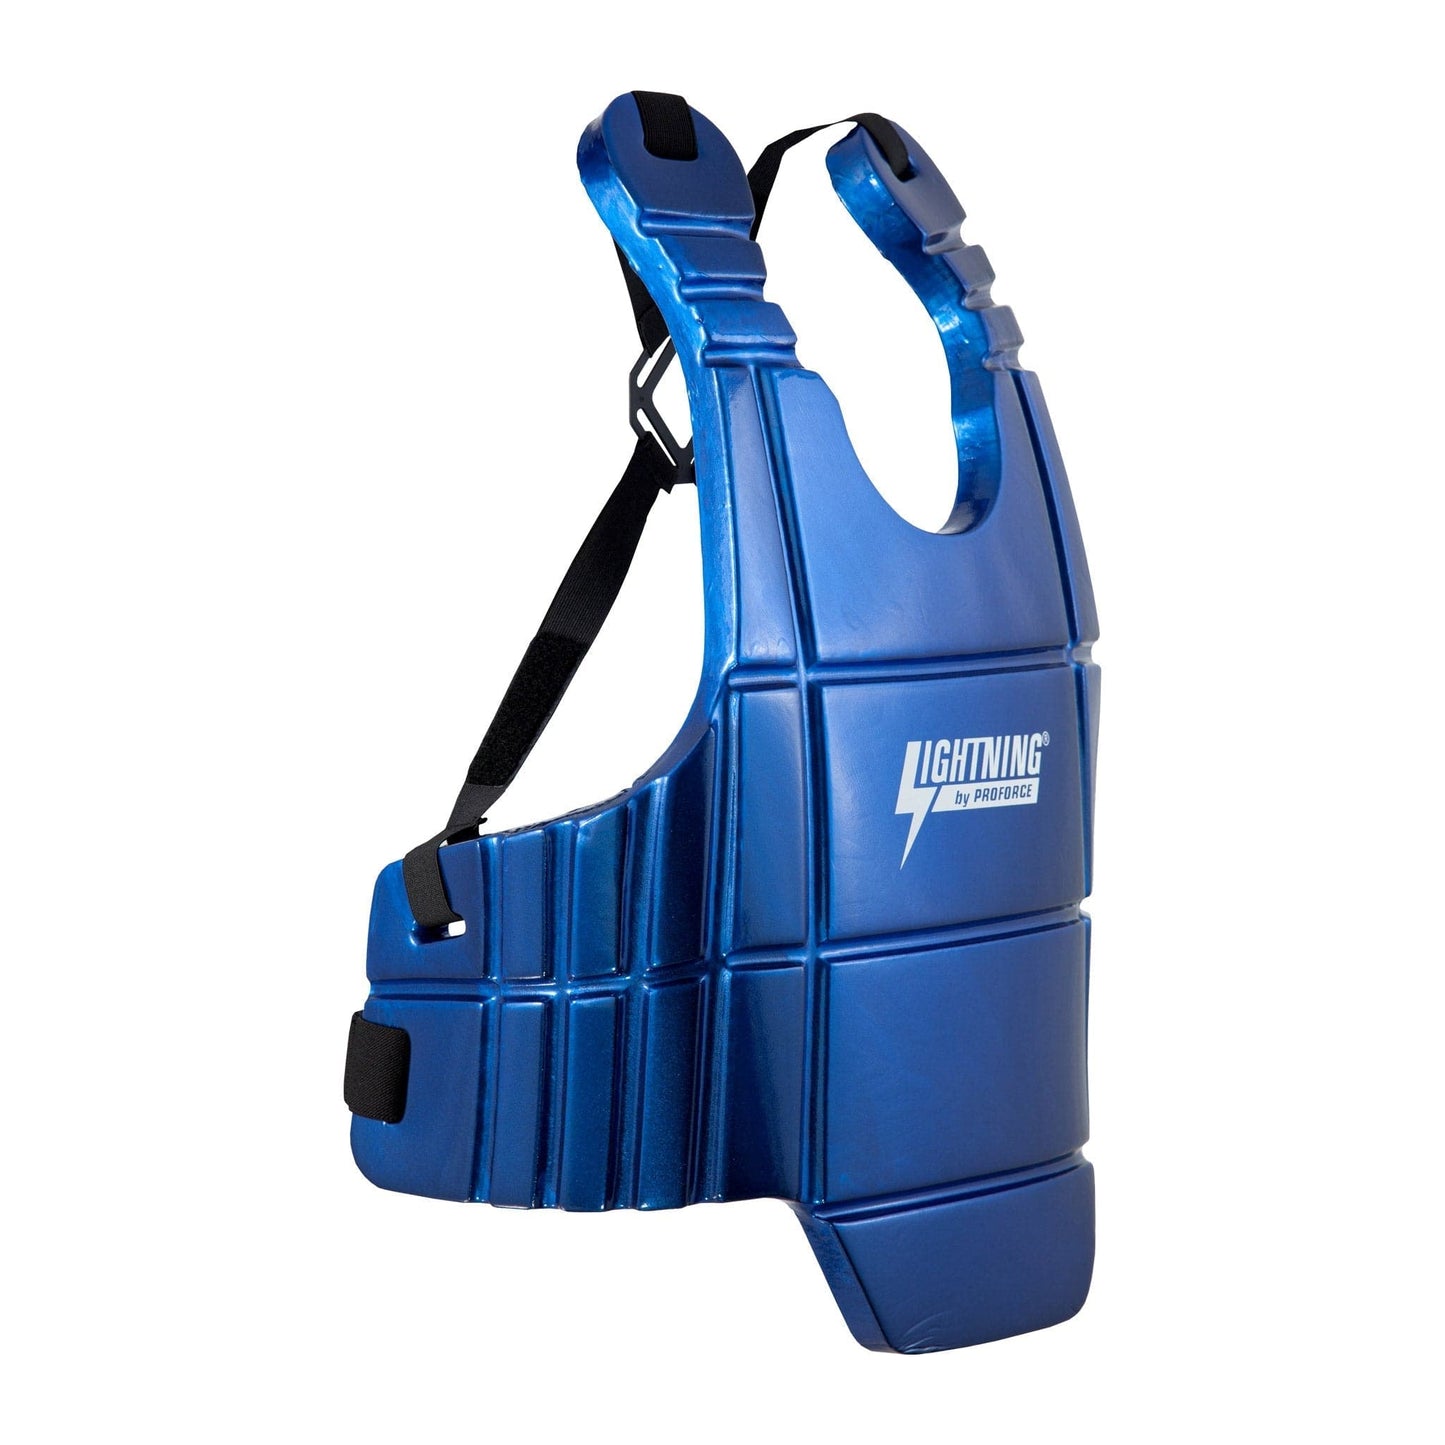 Proforce chest protector Blue / x-small (really small) ProForce Lightning Sports Body Guard